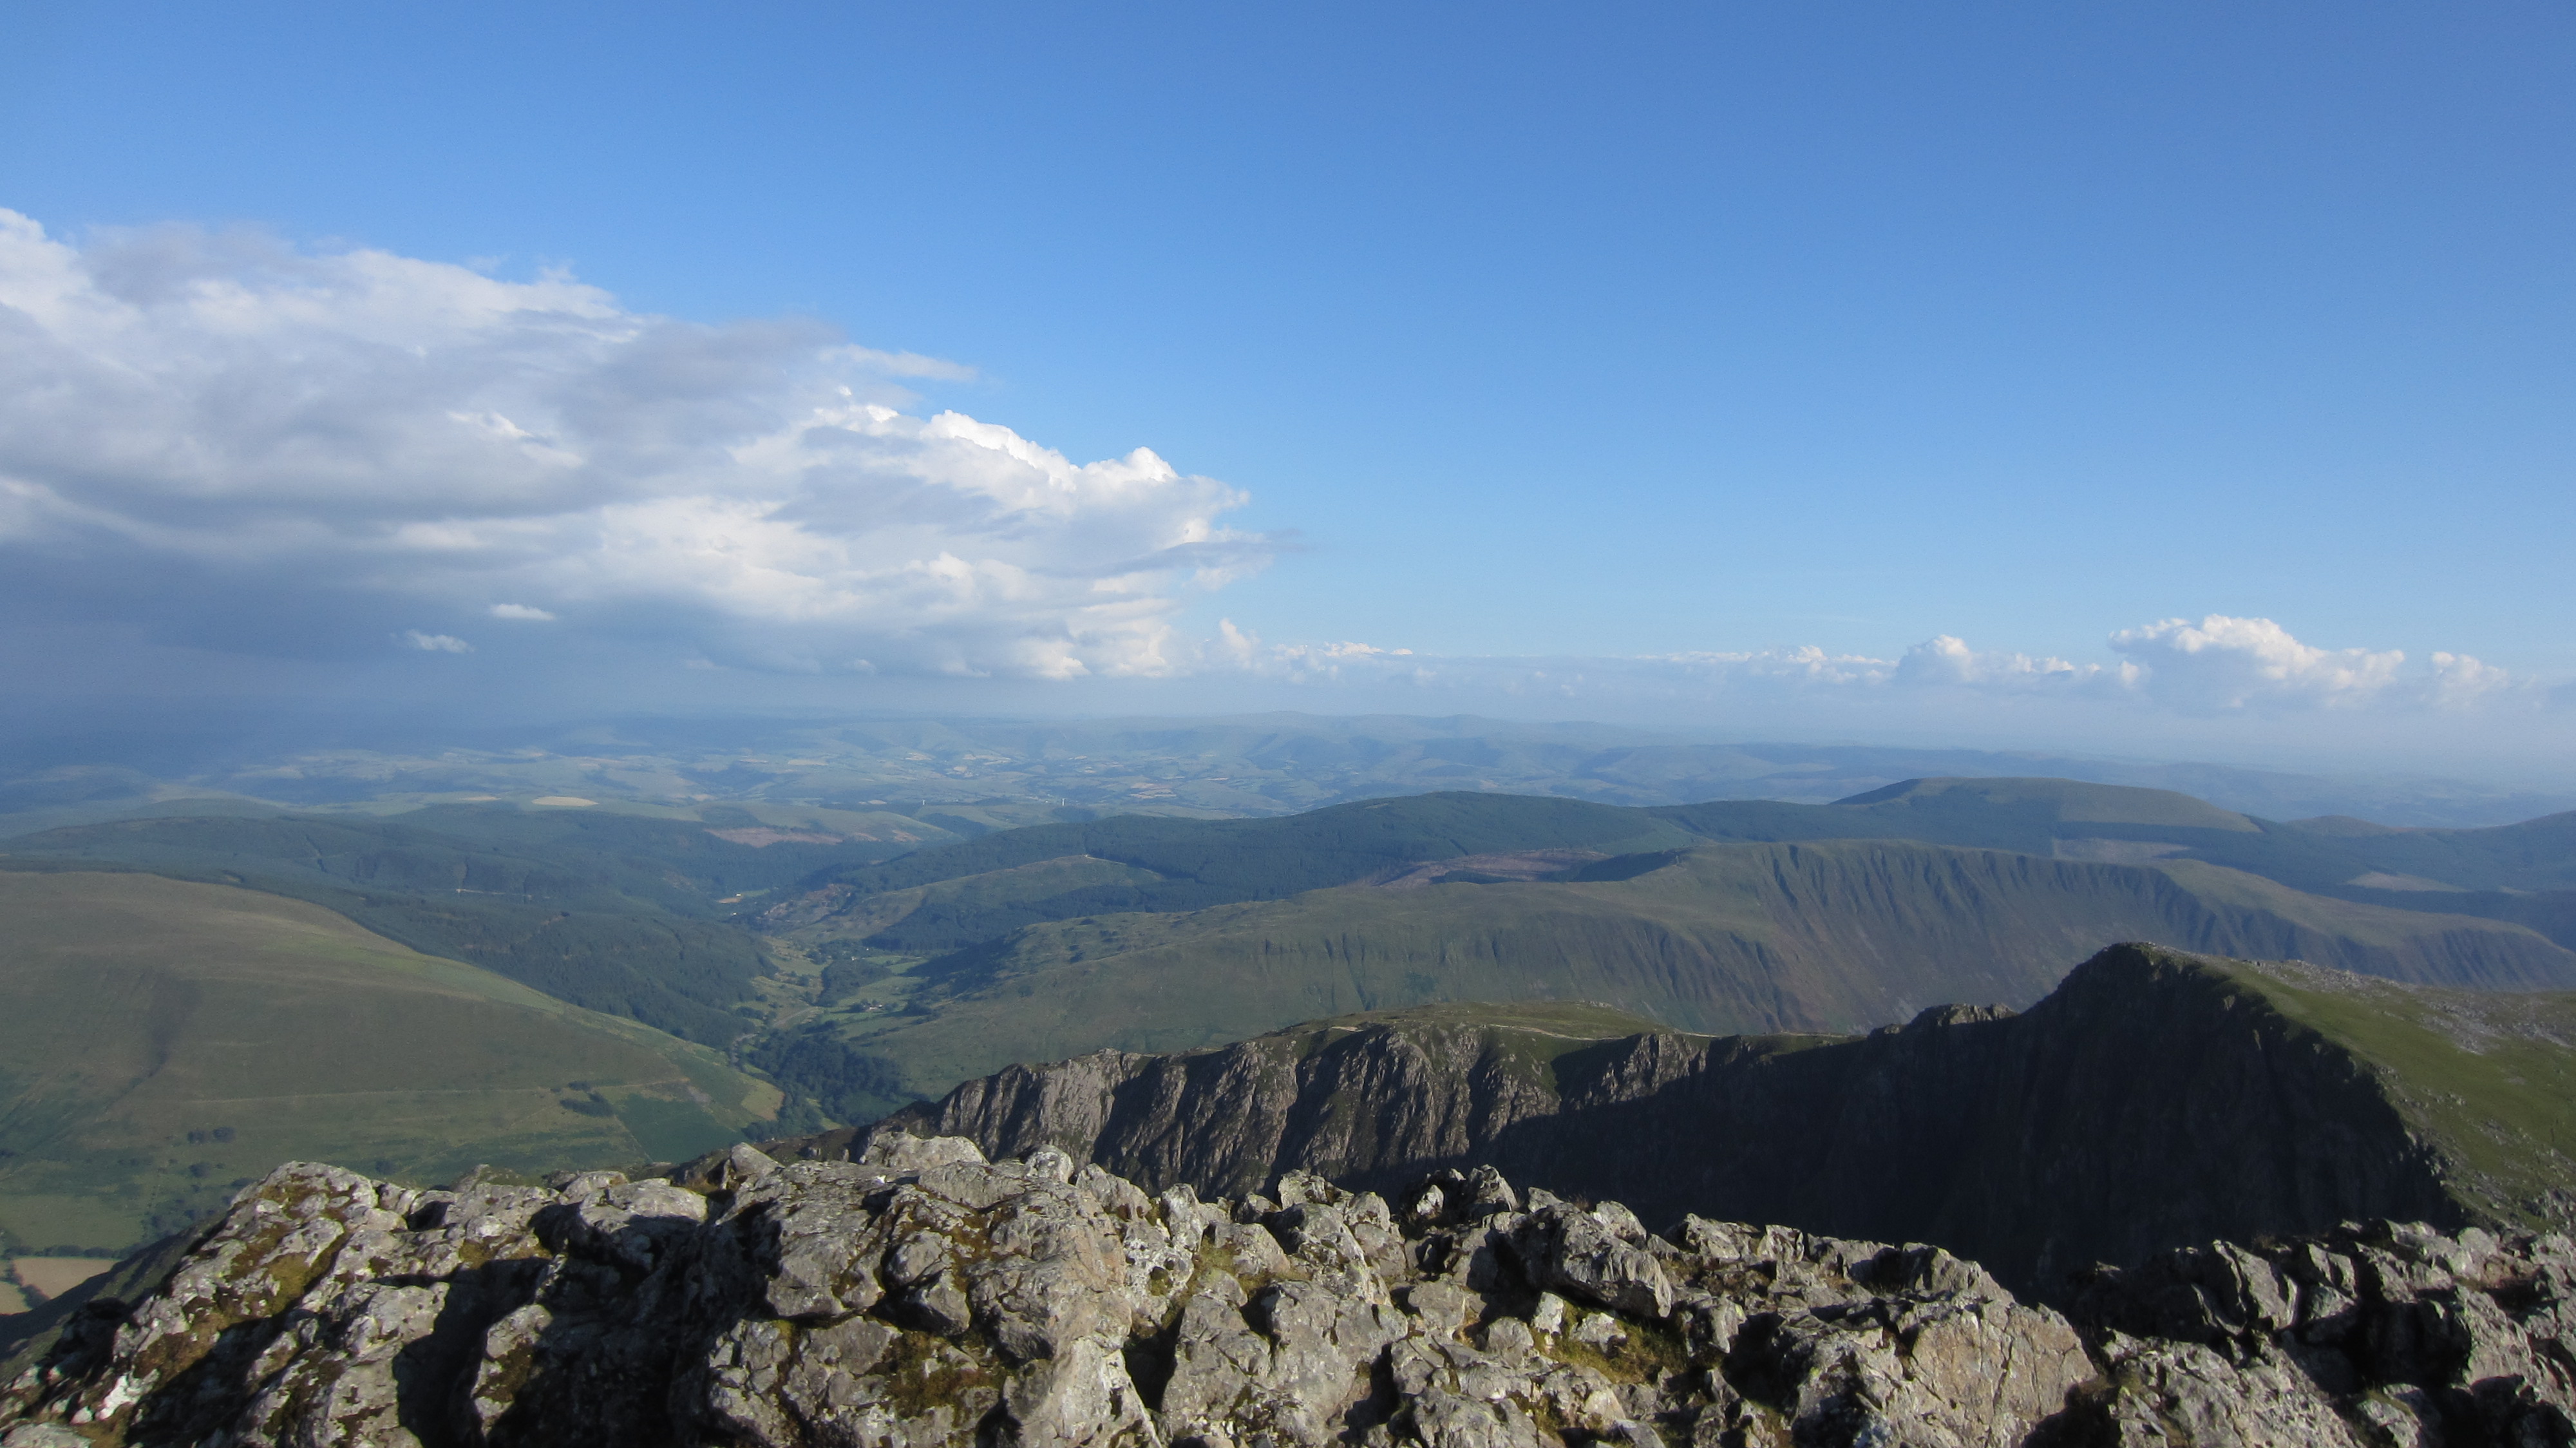 Cadair idris view from trig point looking sse late afternoon 26-7-2013 photo